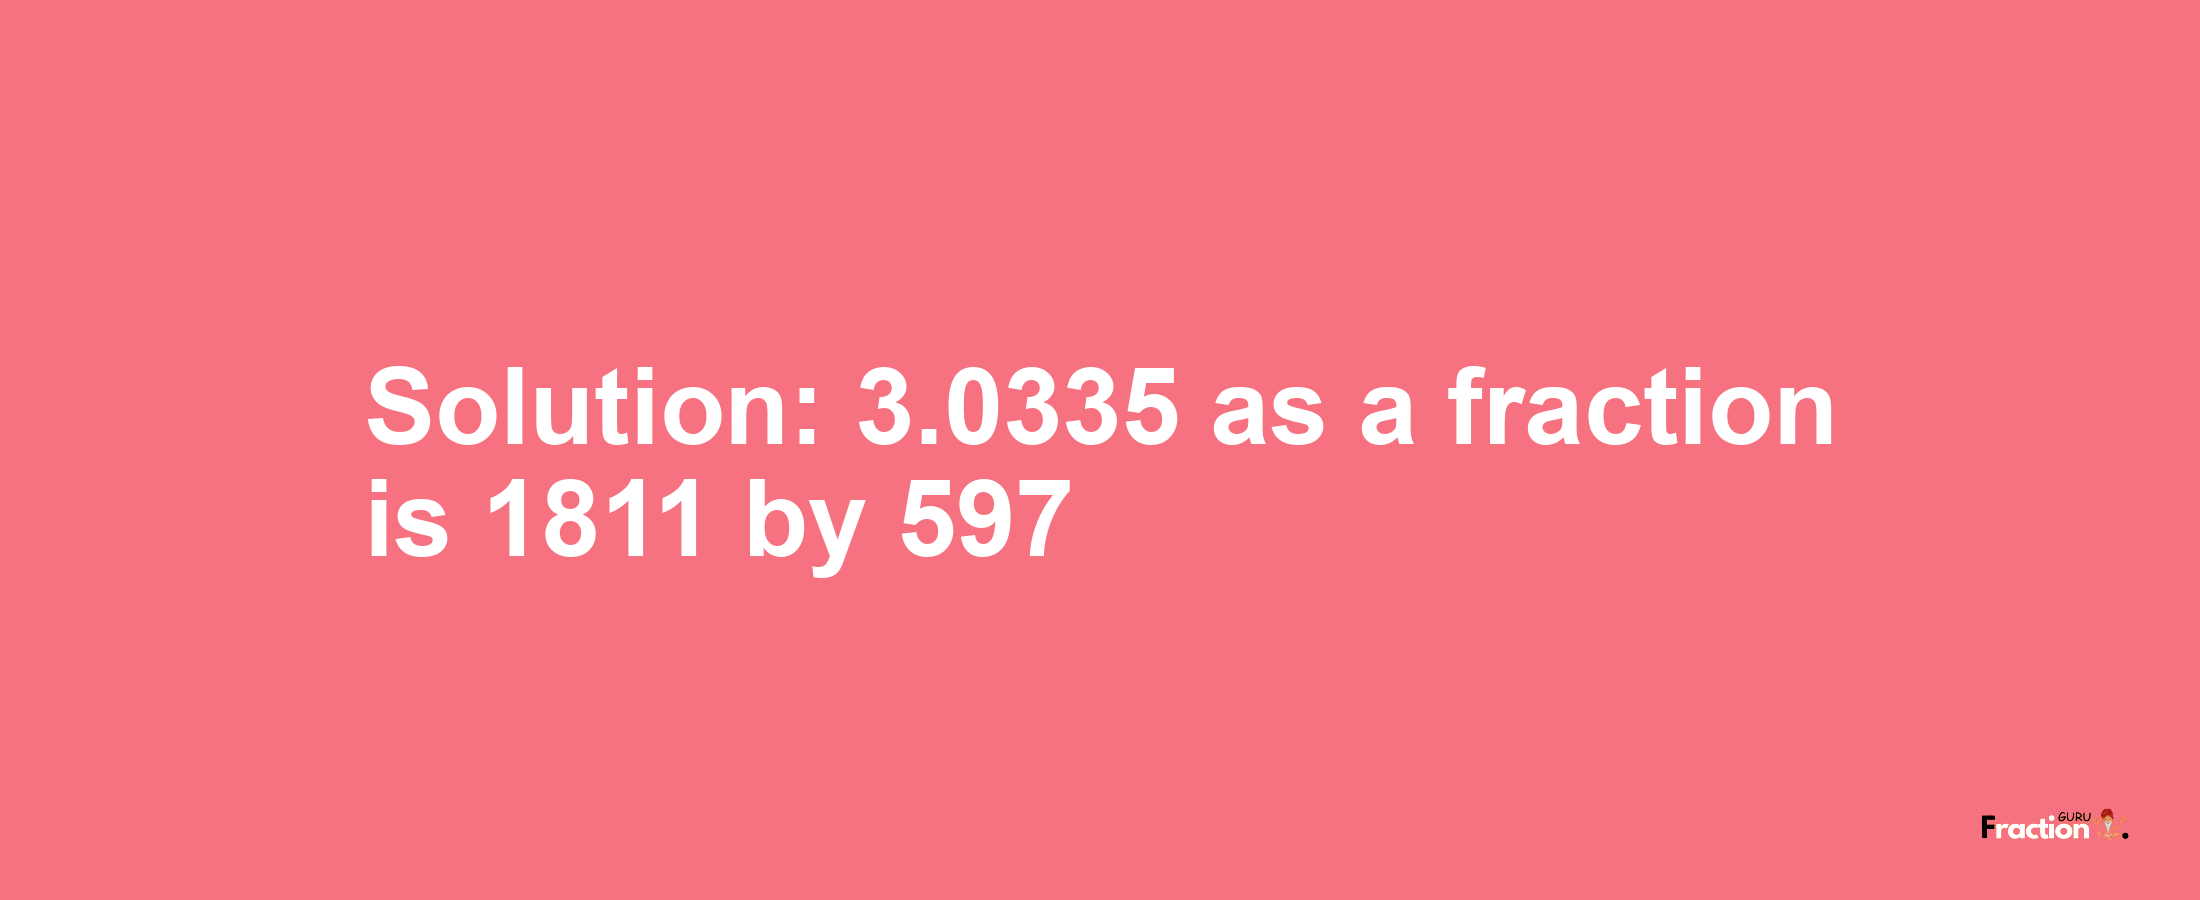 Solution:3.0335 as a fraction is 1811/597